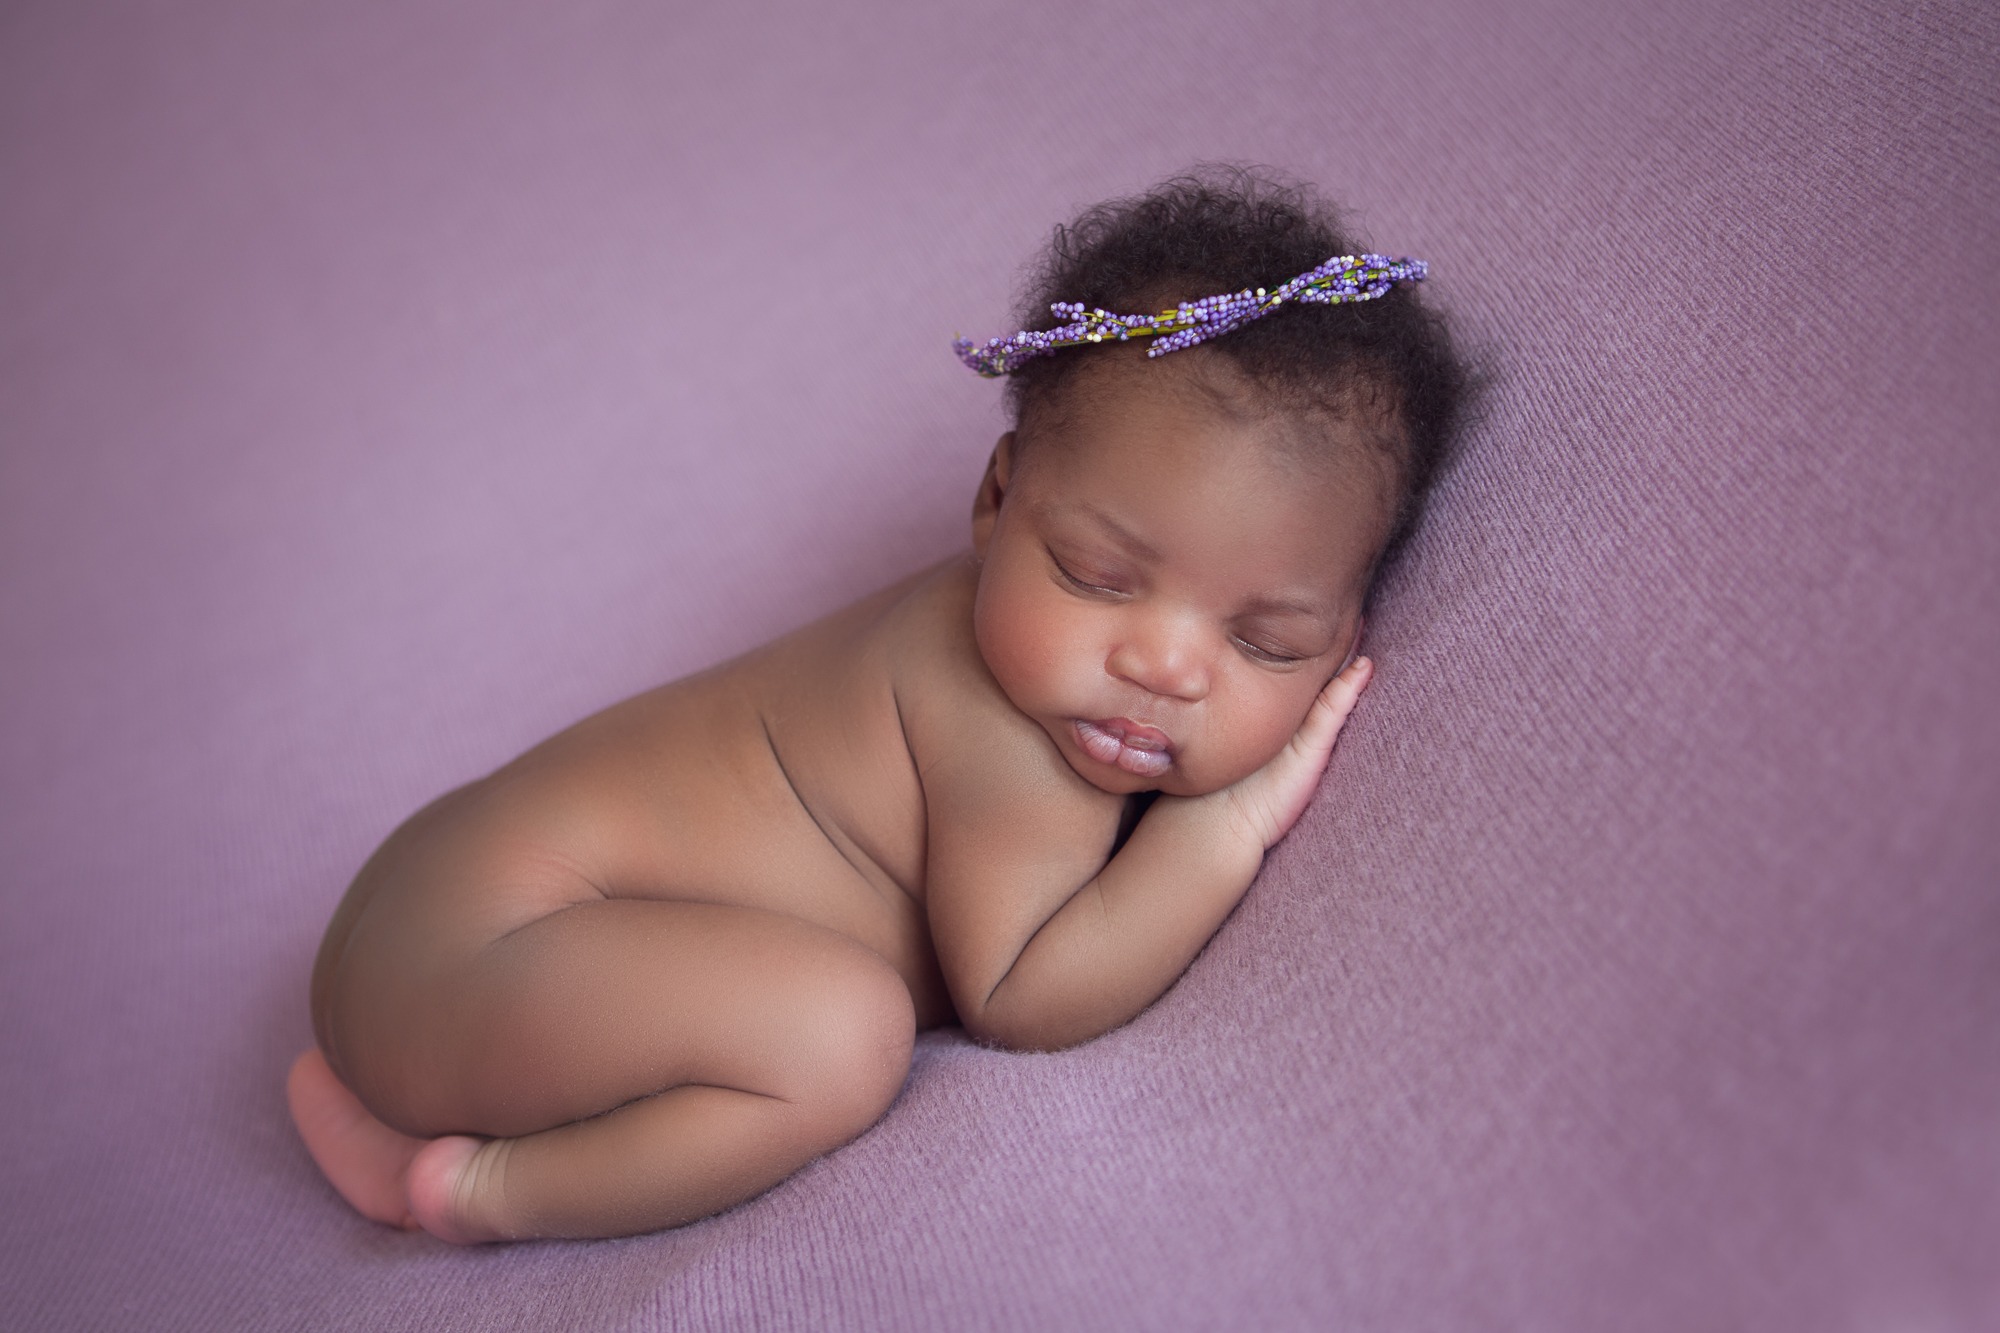 What are some clever newborn photography ideas? - Quora